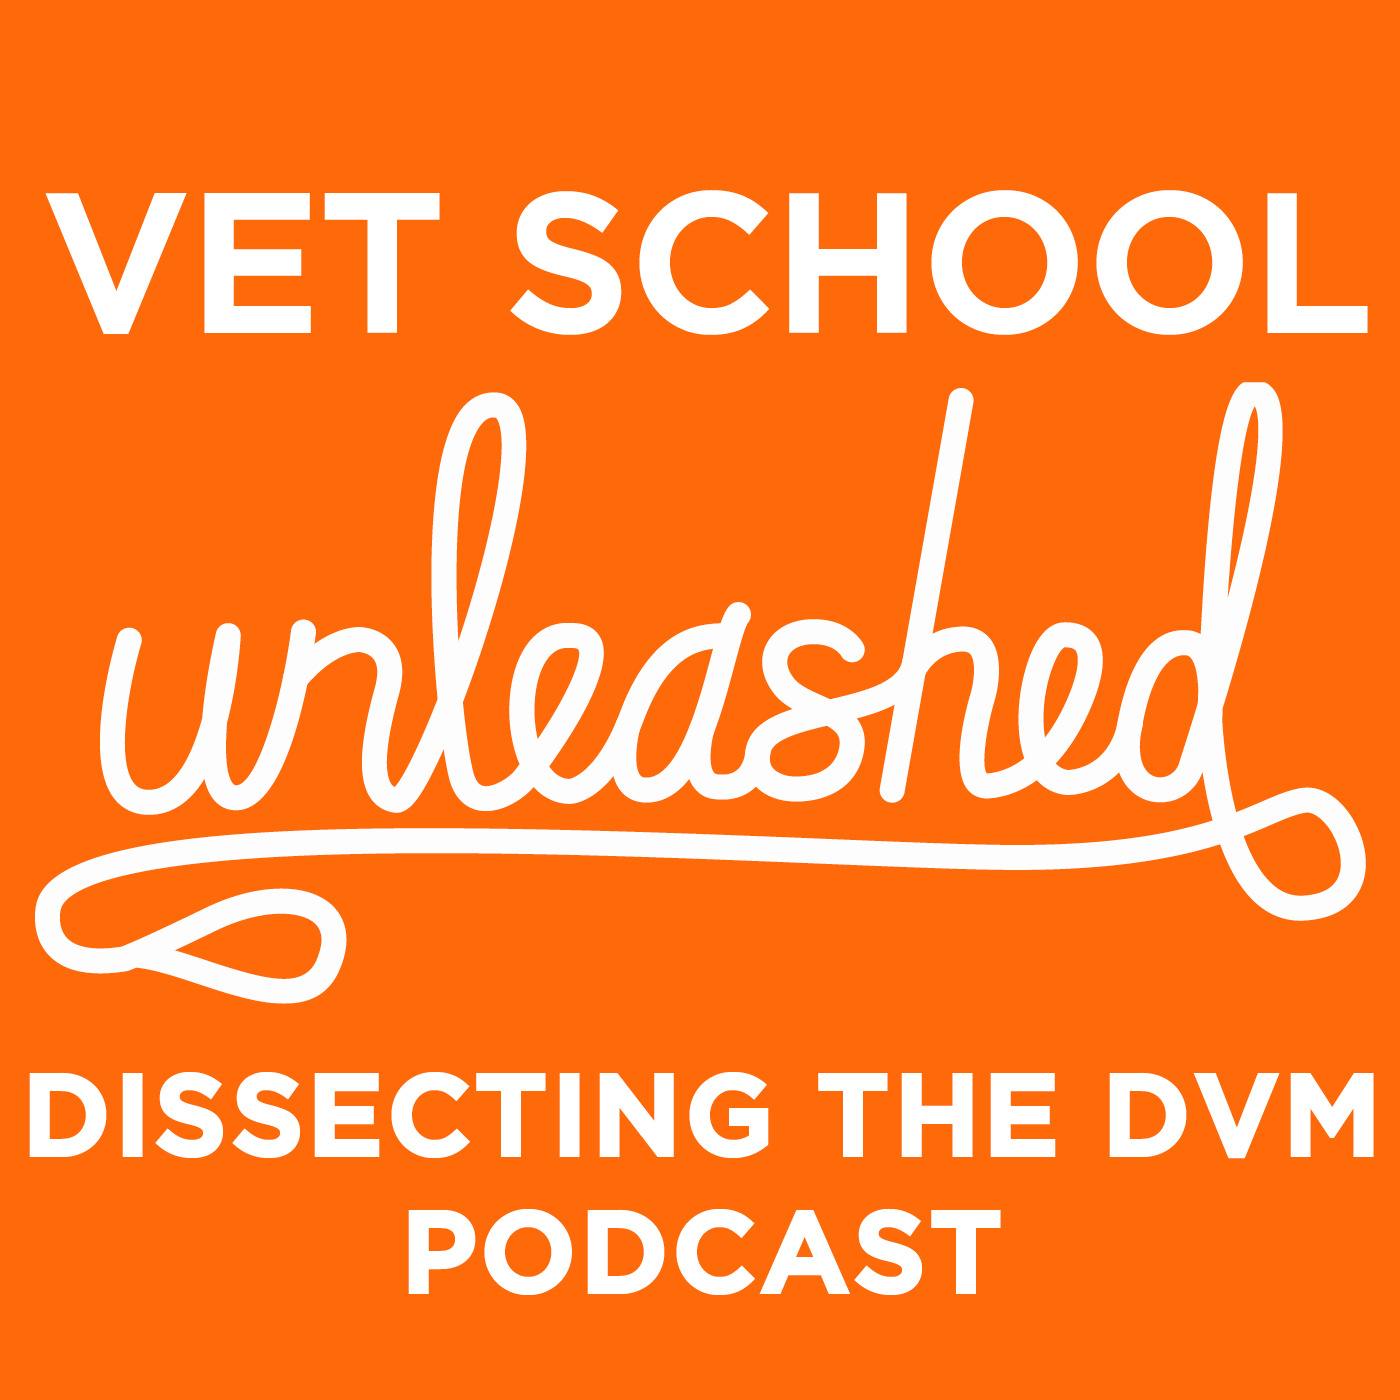 Vet School Unleashed Podcast: Dissecting the DVM